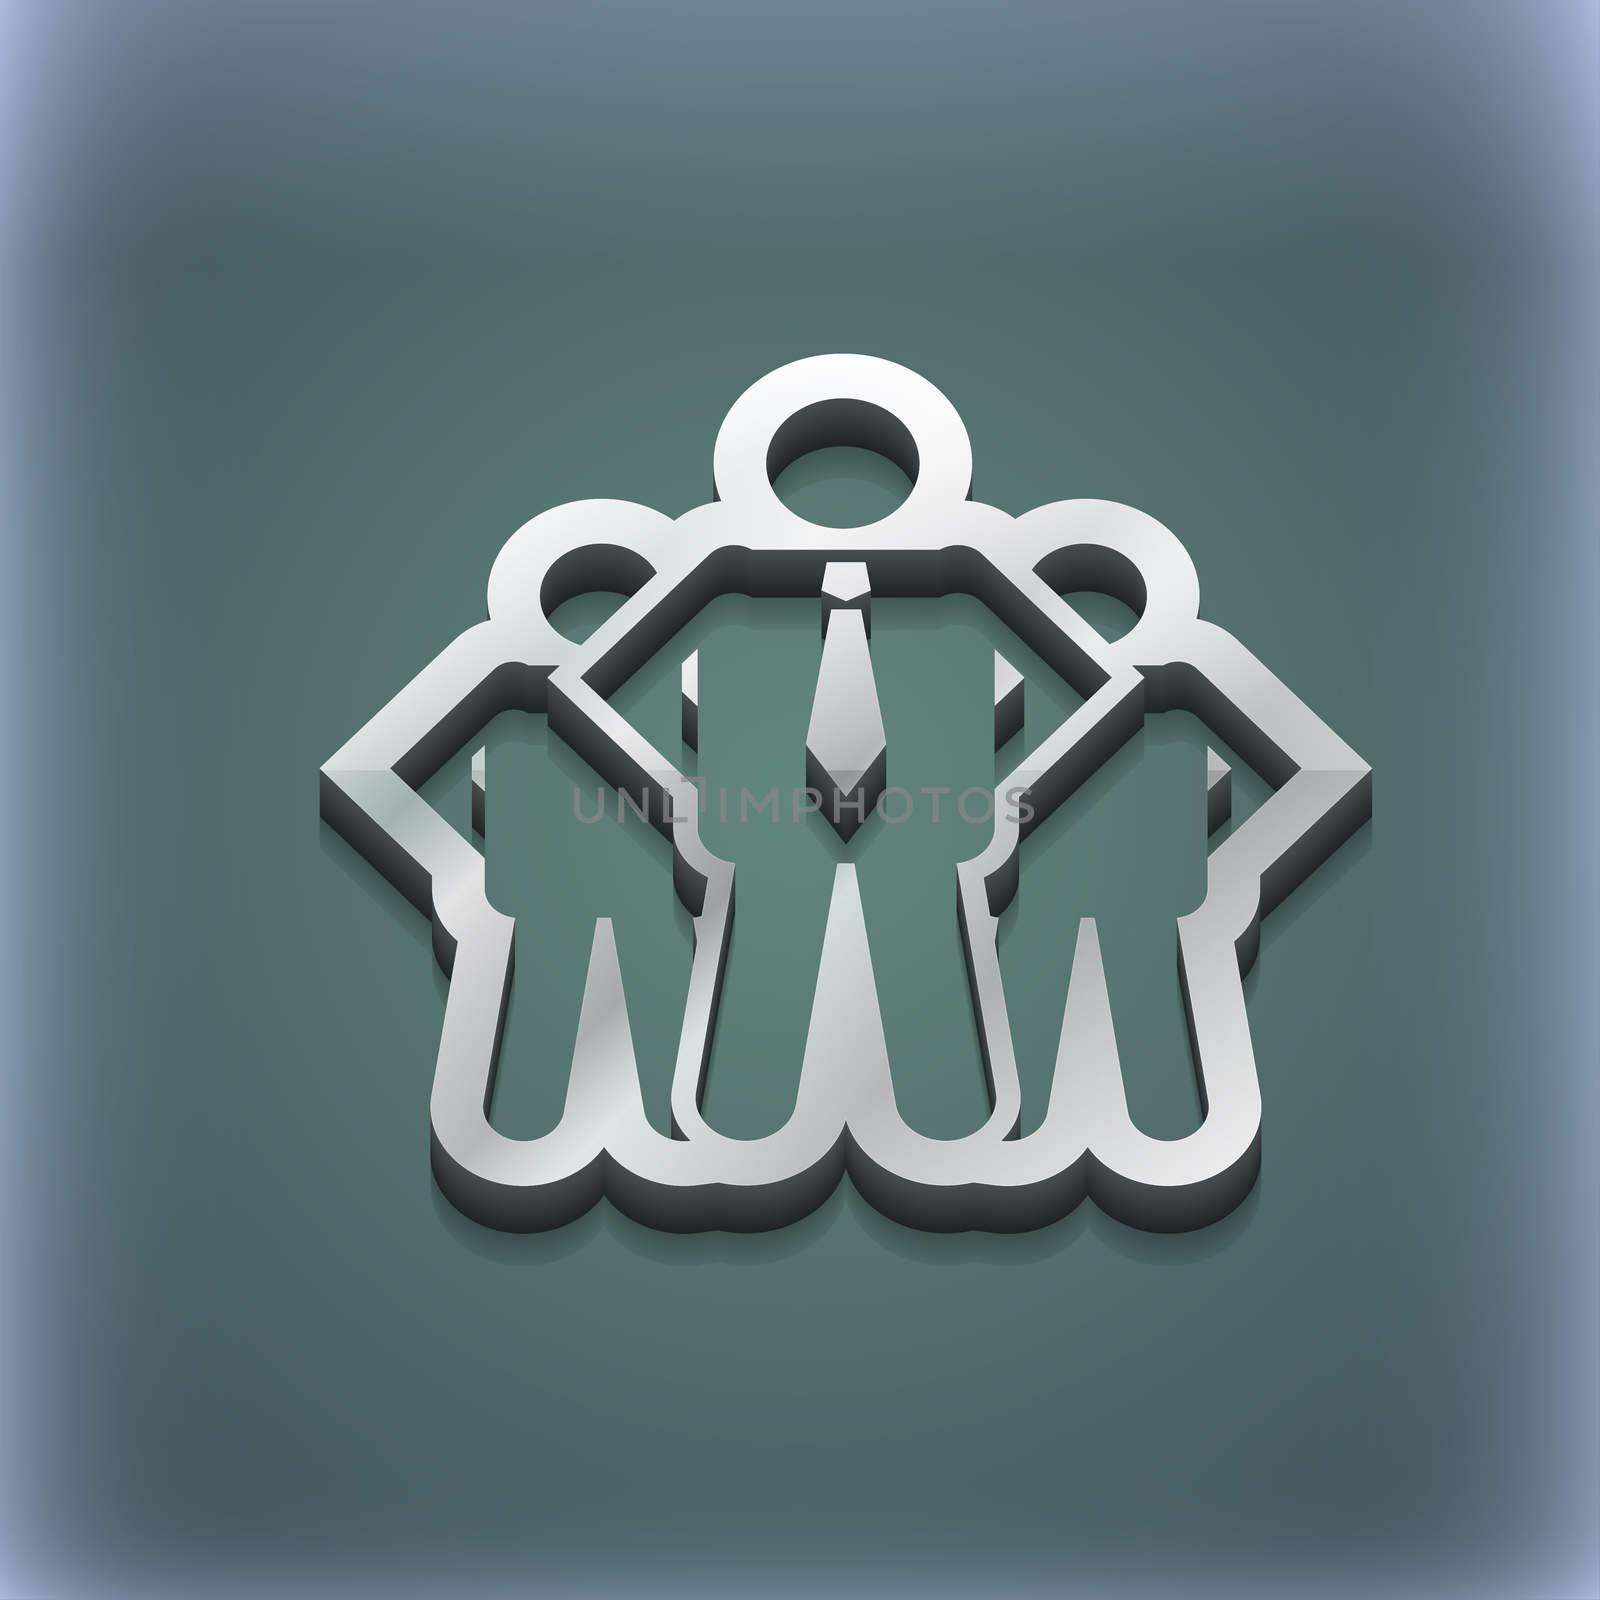 business team icon symbol. 3D style. Trendy, modern design with space for your text illustration. Raster version